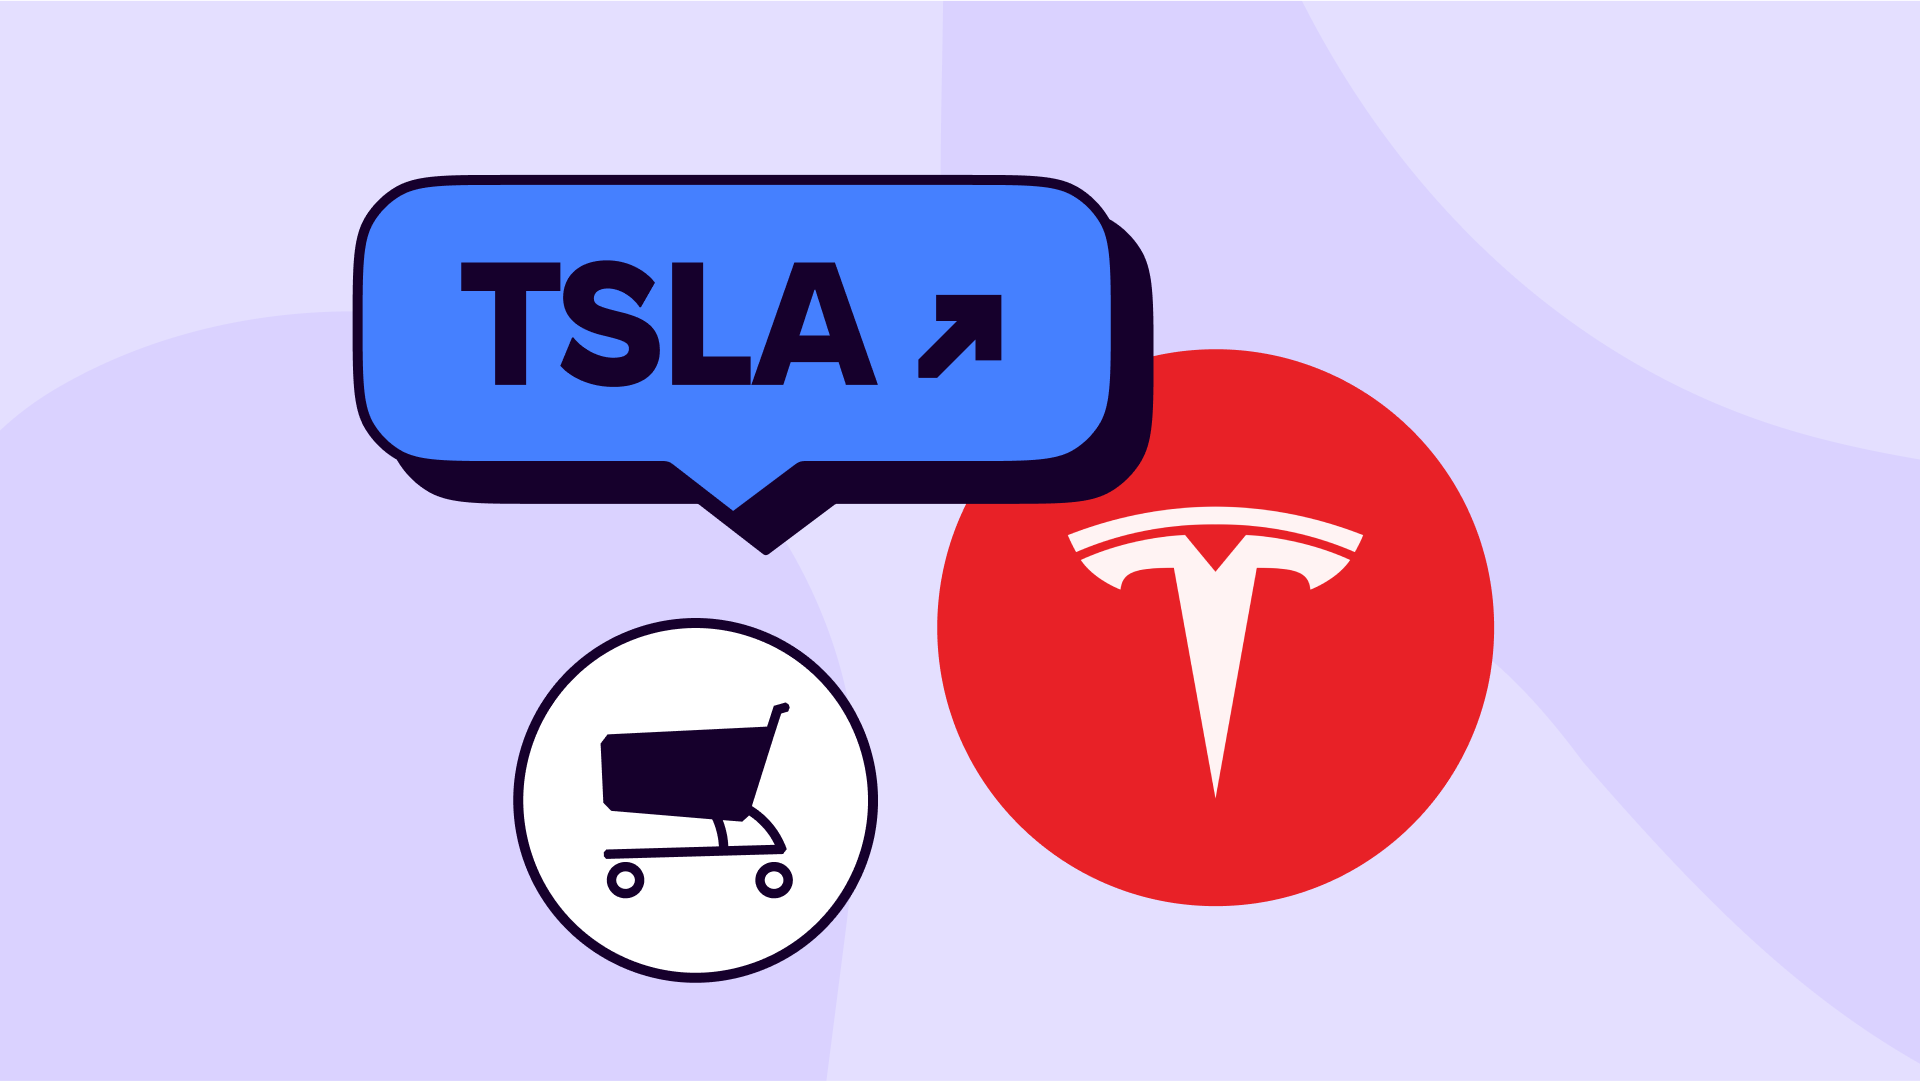 How to buy Tesla shares